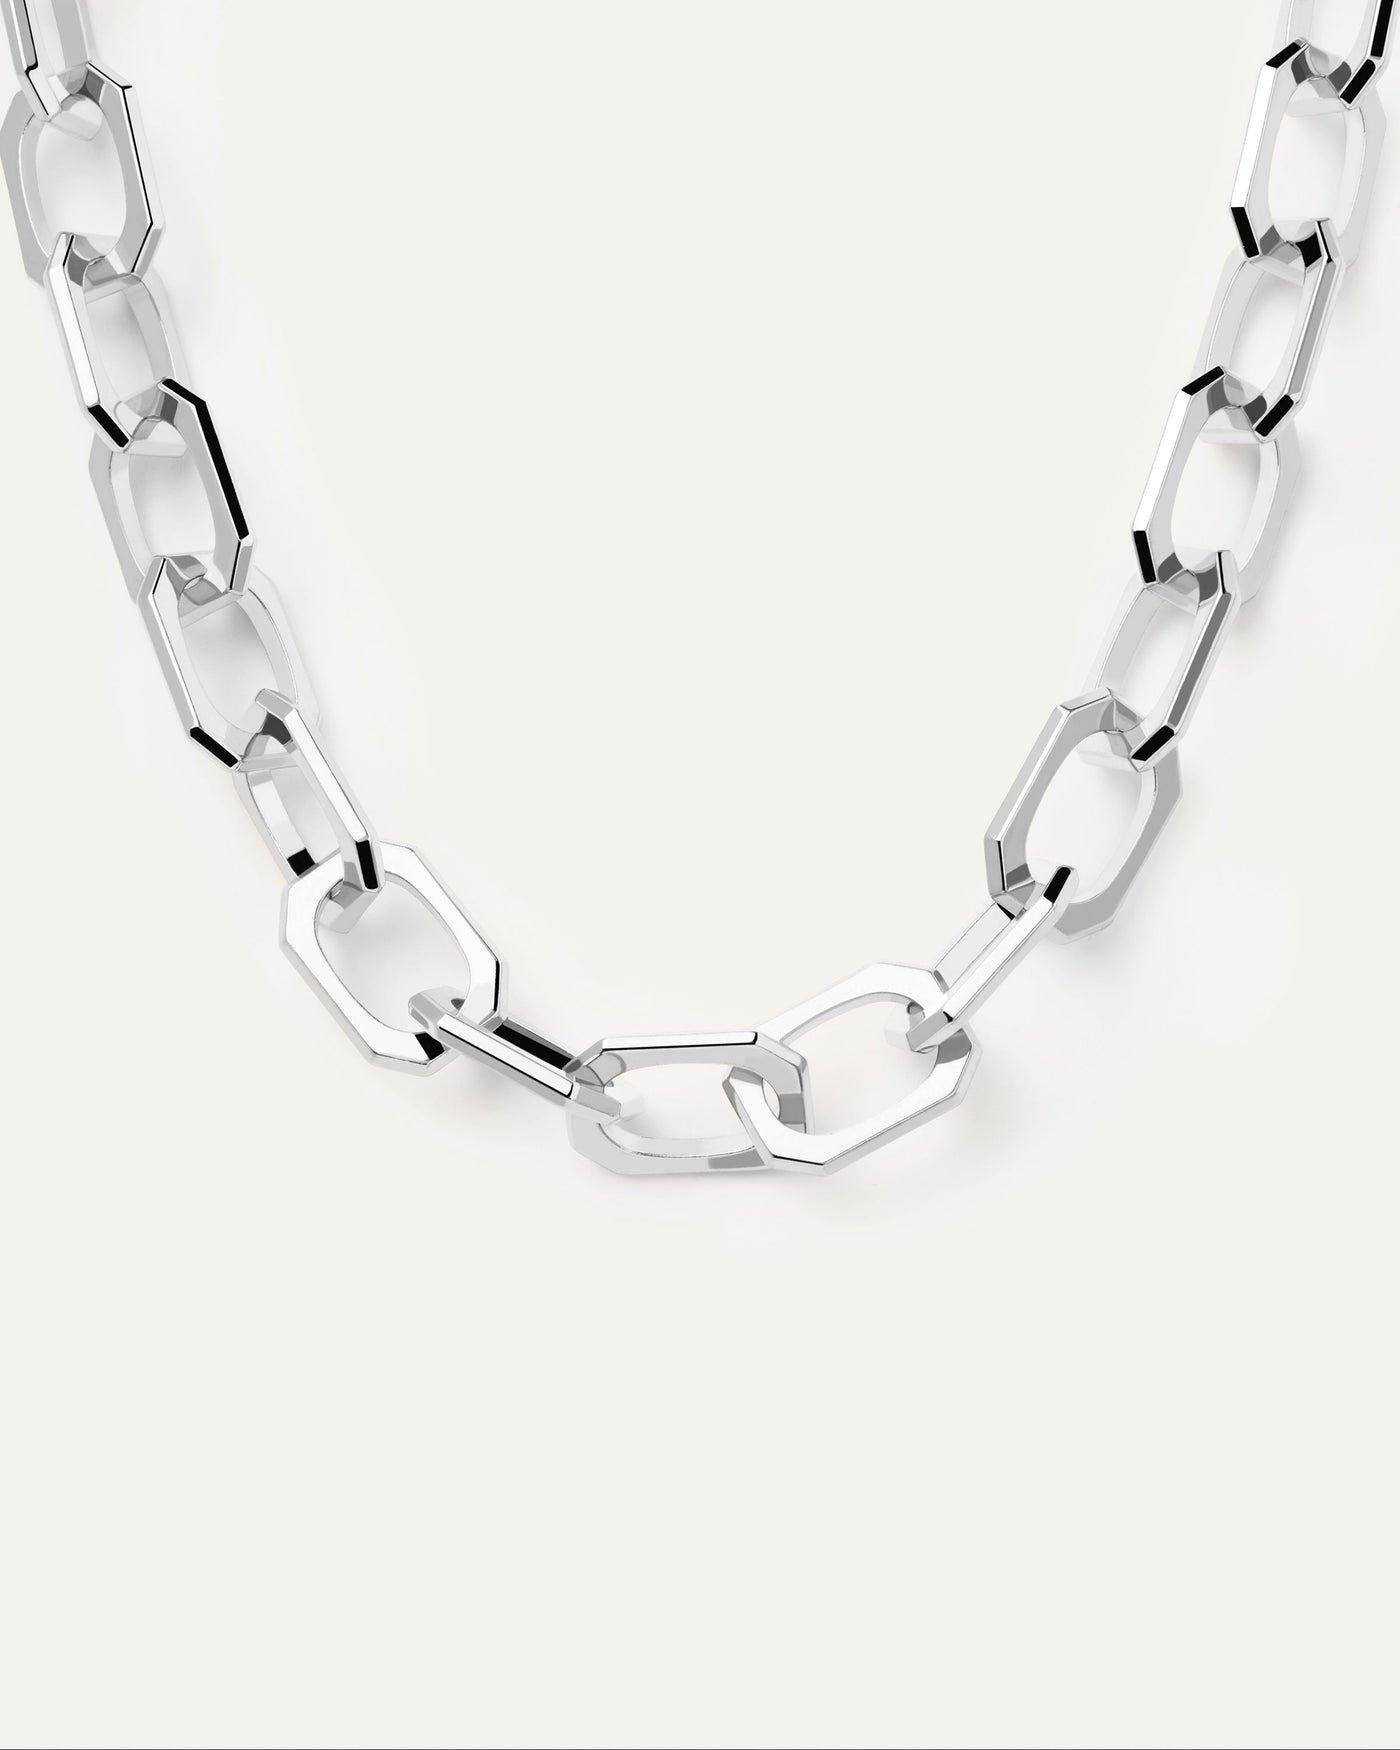 2023 Selection | Large Signature Chain Silver Necklace. Cable chain necklace with big octogonal links in silver rhodium plating. Get the latest arrival from PDPAOLA. Place your order safely and get this Best Seller. Free Shipping.